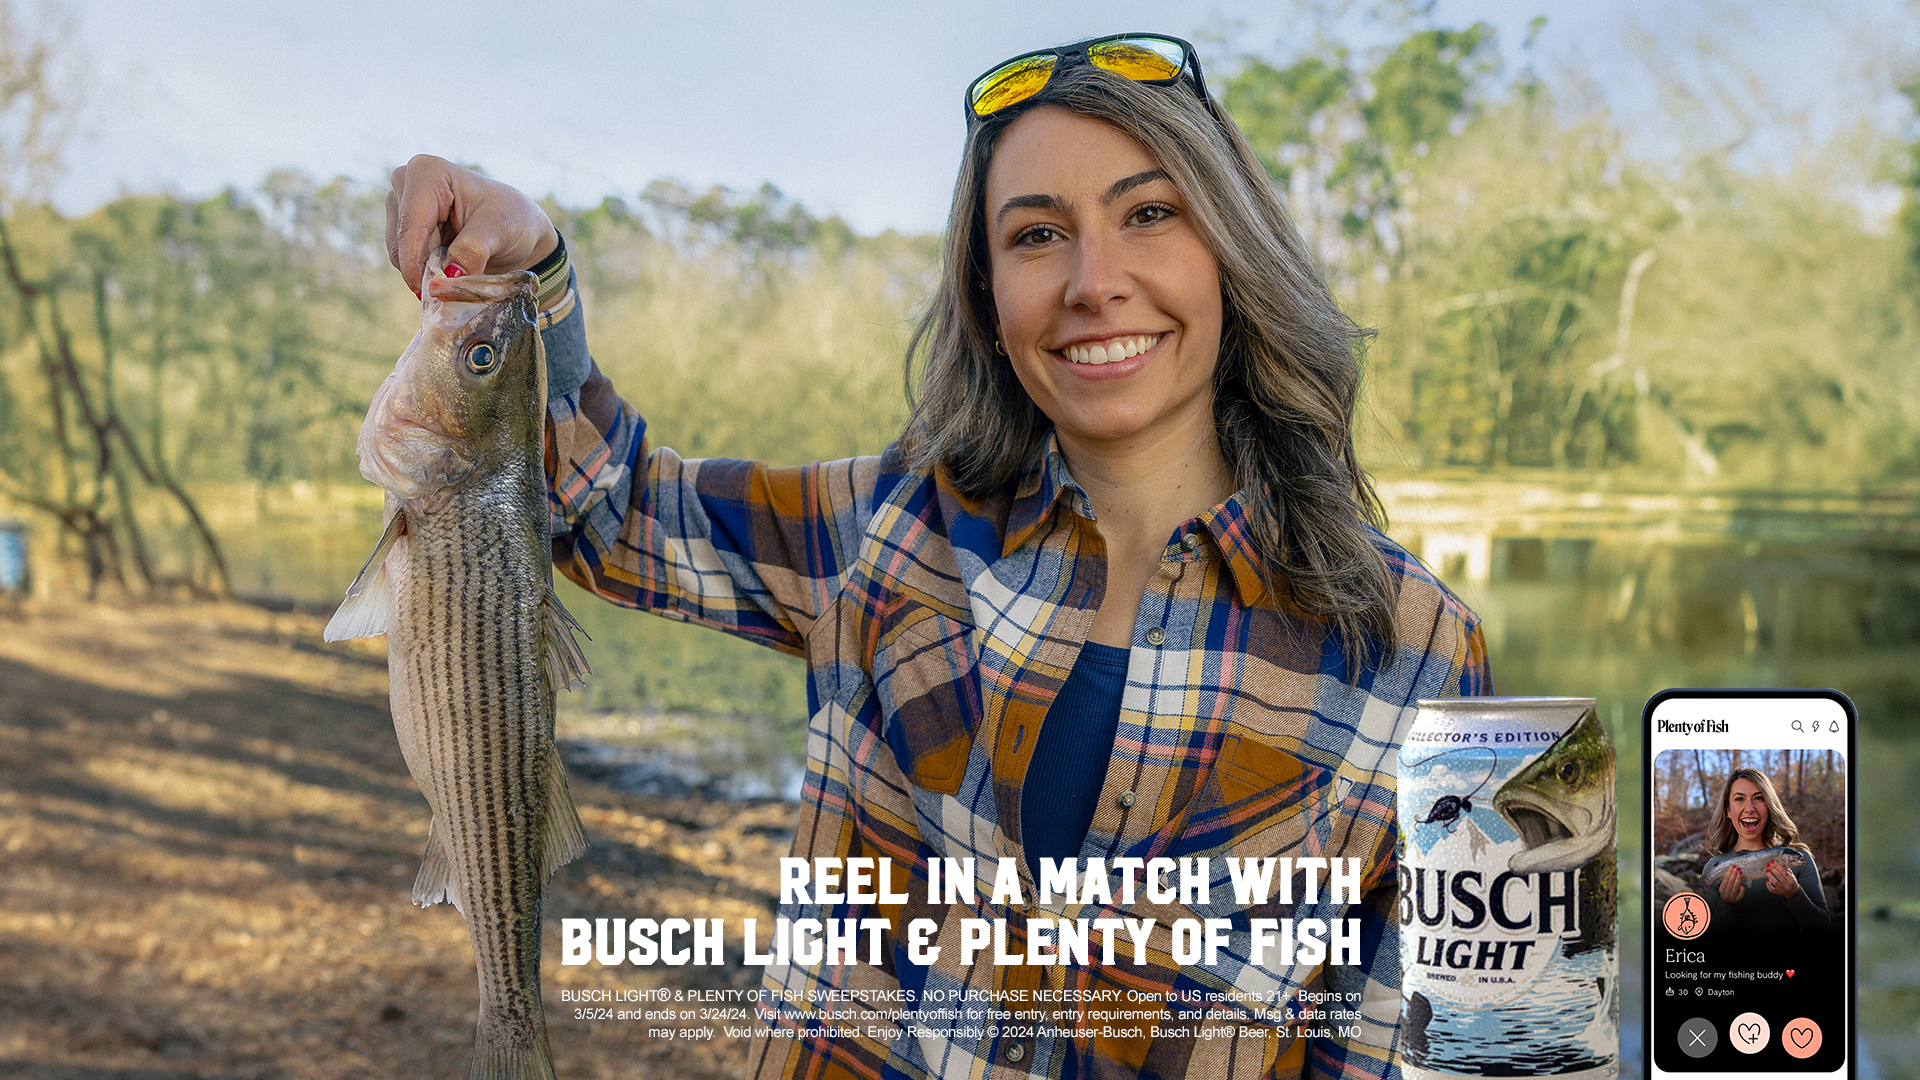 Busch Light newest campaign, 'Helps Iowa Singles Find Love with